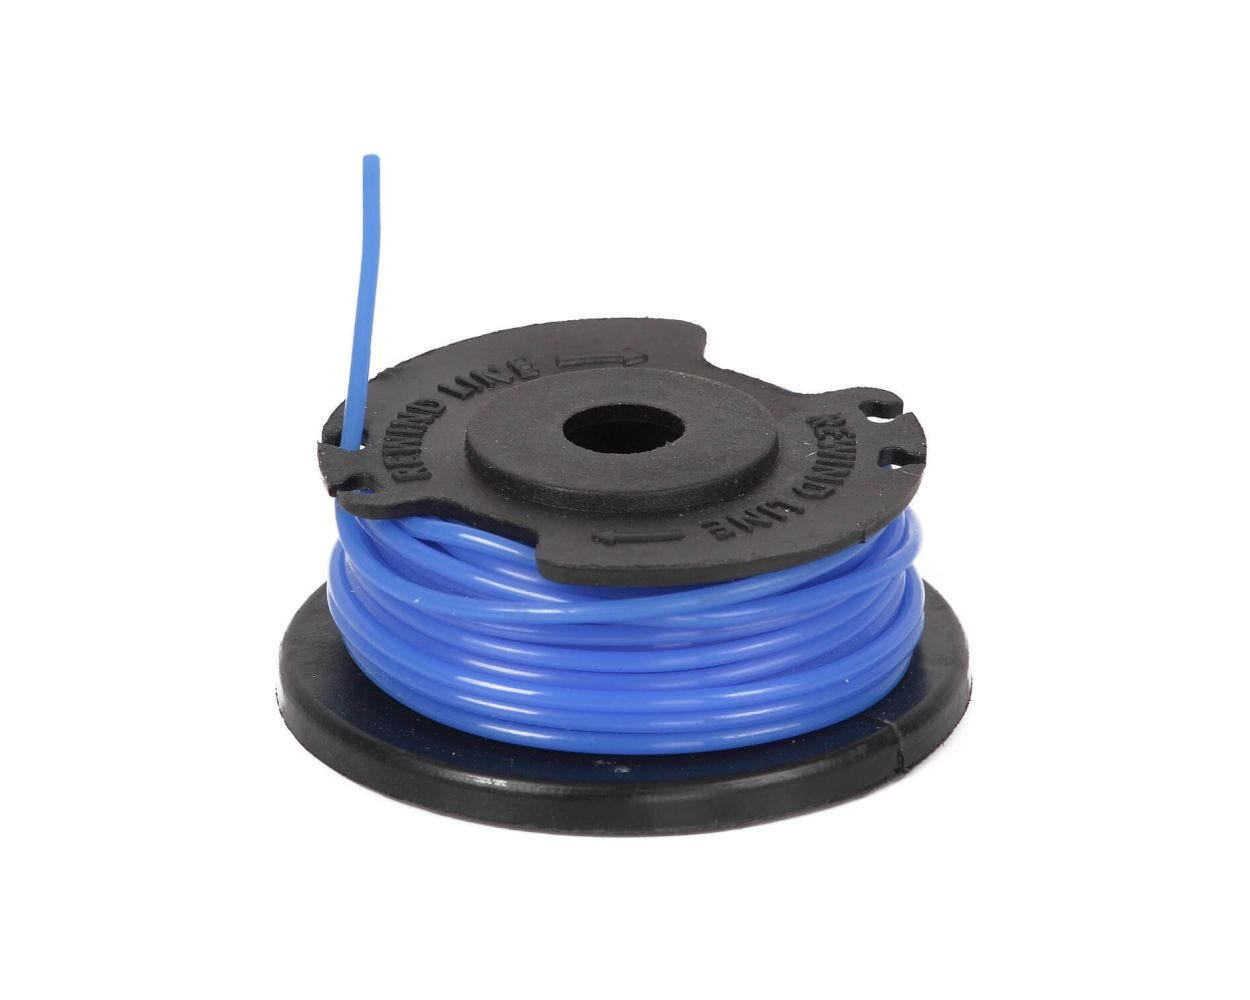 Single Line Replacement String Trimmer Spool for Greenworks 24V and 40V Single Line String Trimmers